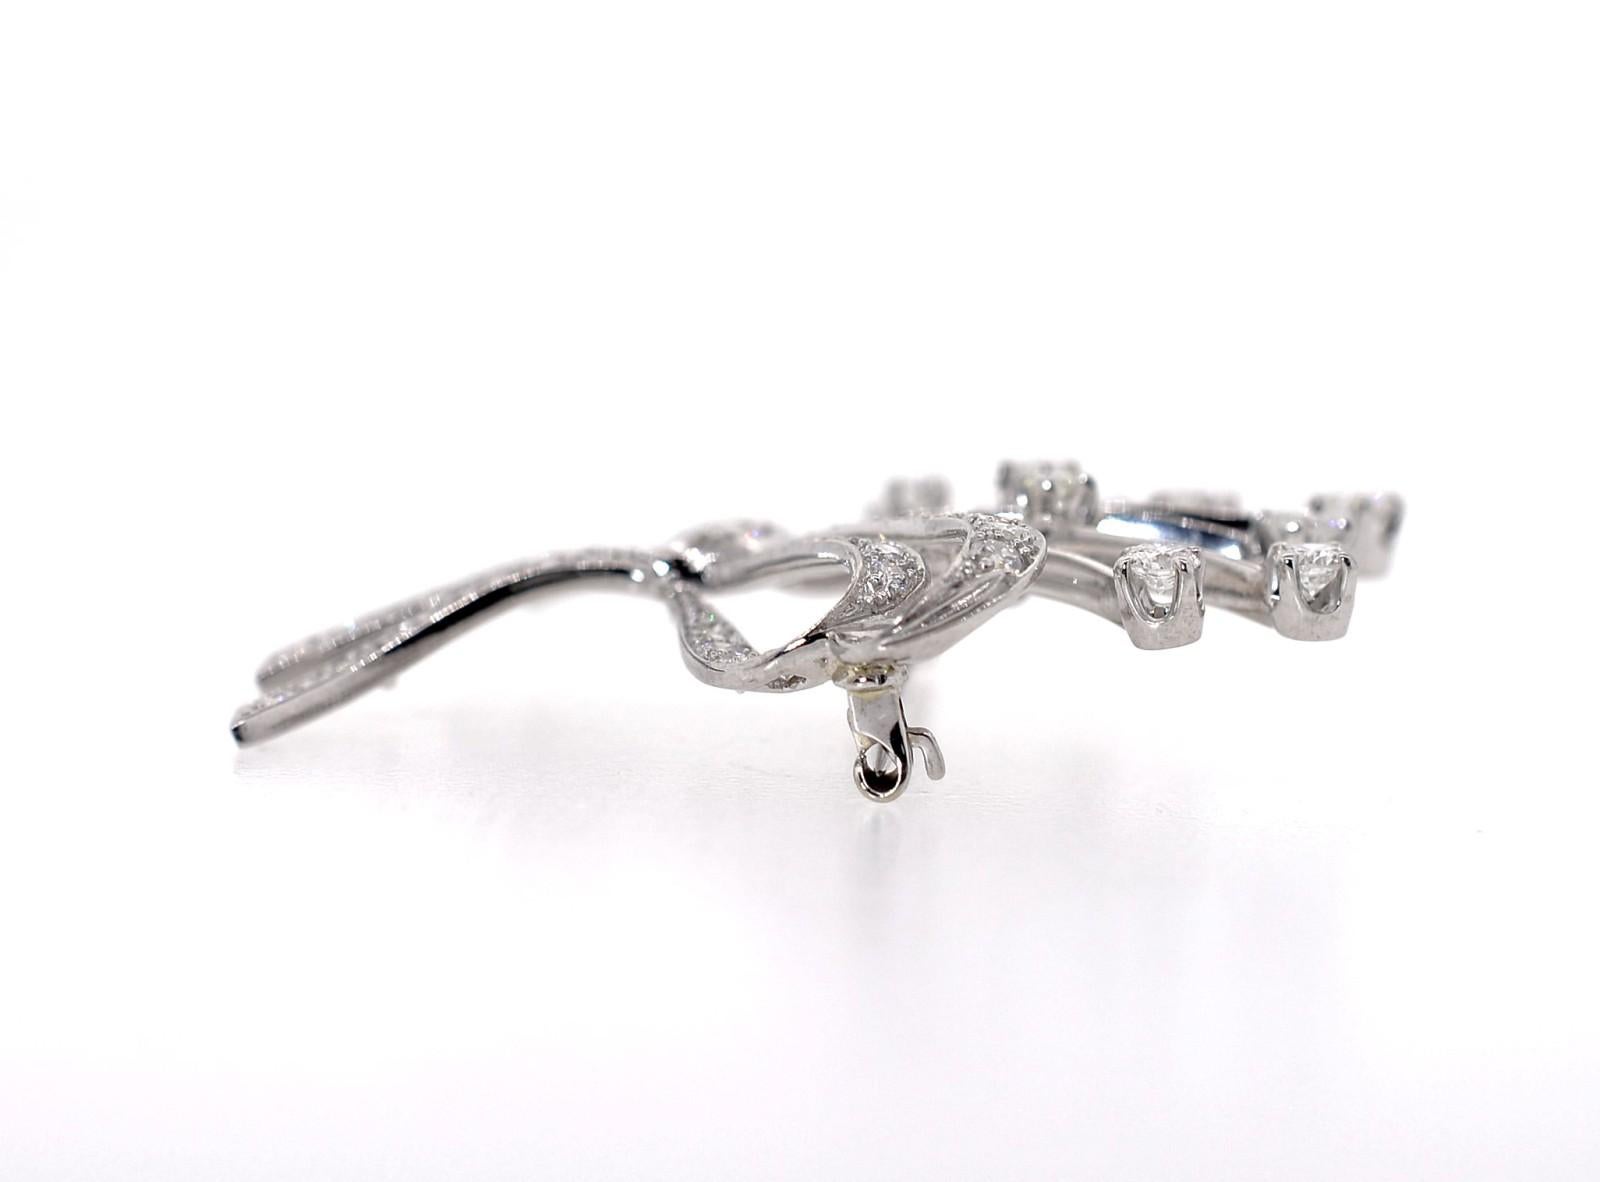 Hand created in the 1960s, this diamond and platinum brooch is a dazzler. Of a spray design with a double bow, it is set with approx. 1.75 carat of sparkling Round Brilliant and approx. 0.45 carat of Single cut diamonds, all totaling approx. 2.20